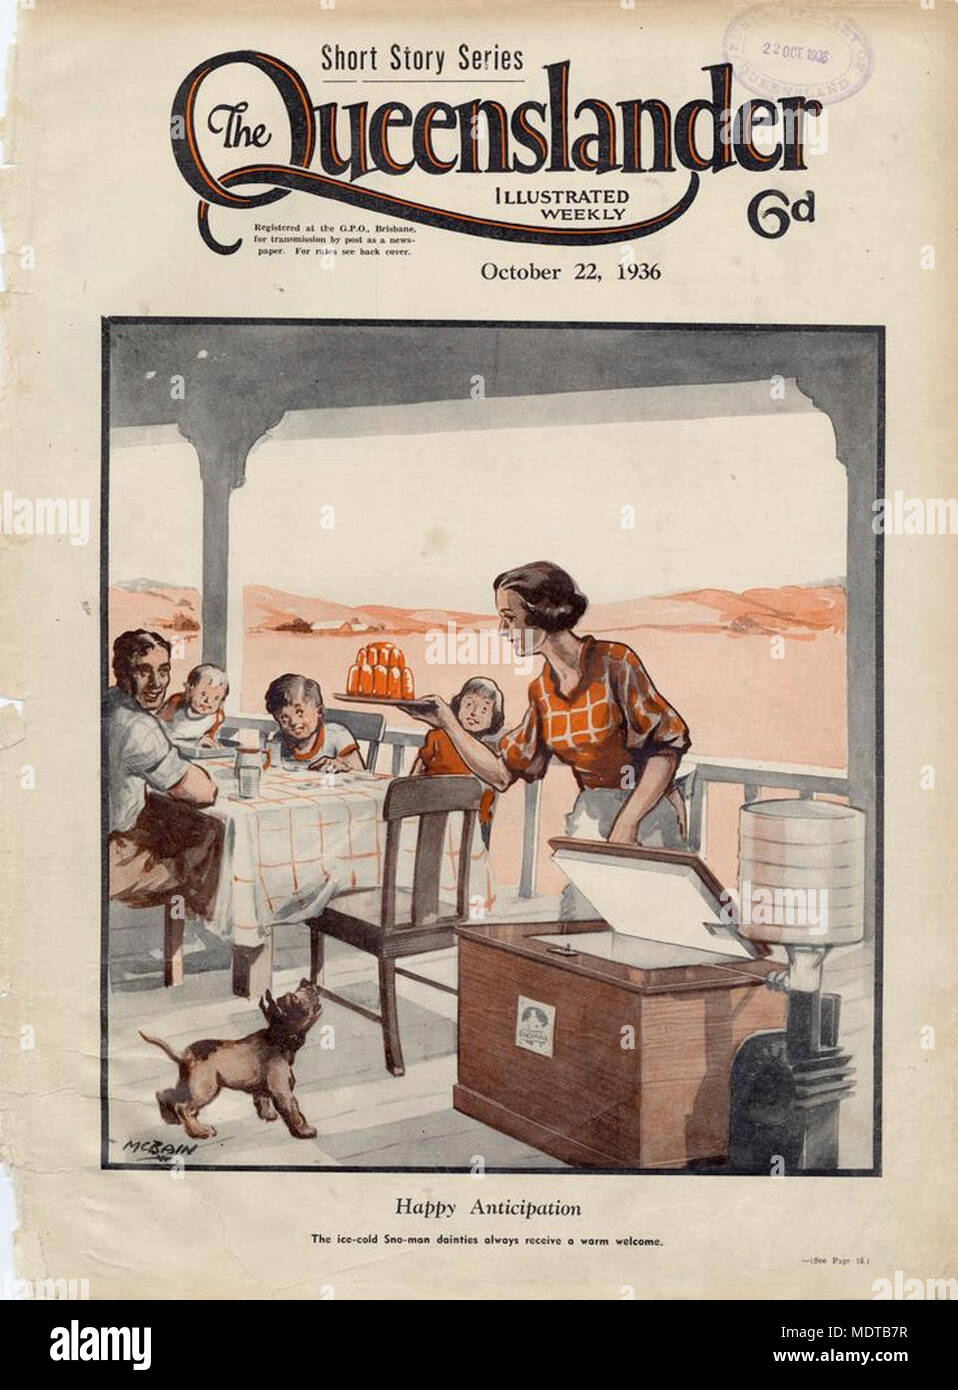 https://c8.alamy.com/comp/MDTB7R/illustrated-front-cover-from-the-queenslander-october-22-1936-location-queensland-australia-description-caption-happy-anticipation-the-ice-cold-sno-man-dainties-always-receive-a-warm-welcome-the-mother-takes-out-some-ice-cold-treats-from-the-sno-man-ice-box-while-the-family-sits-at-the-table-in-anticipation-MDTB7R.jpg